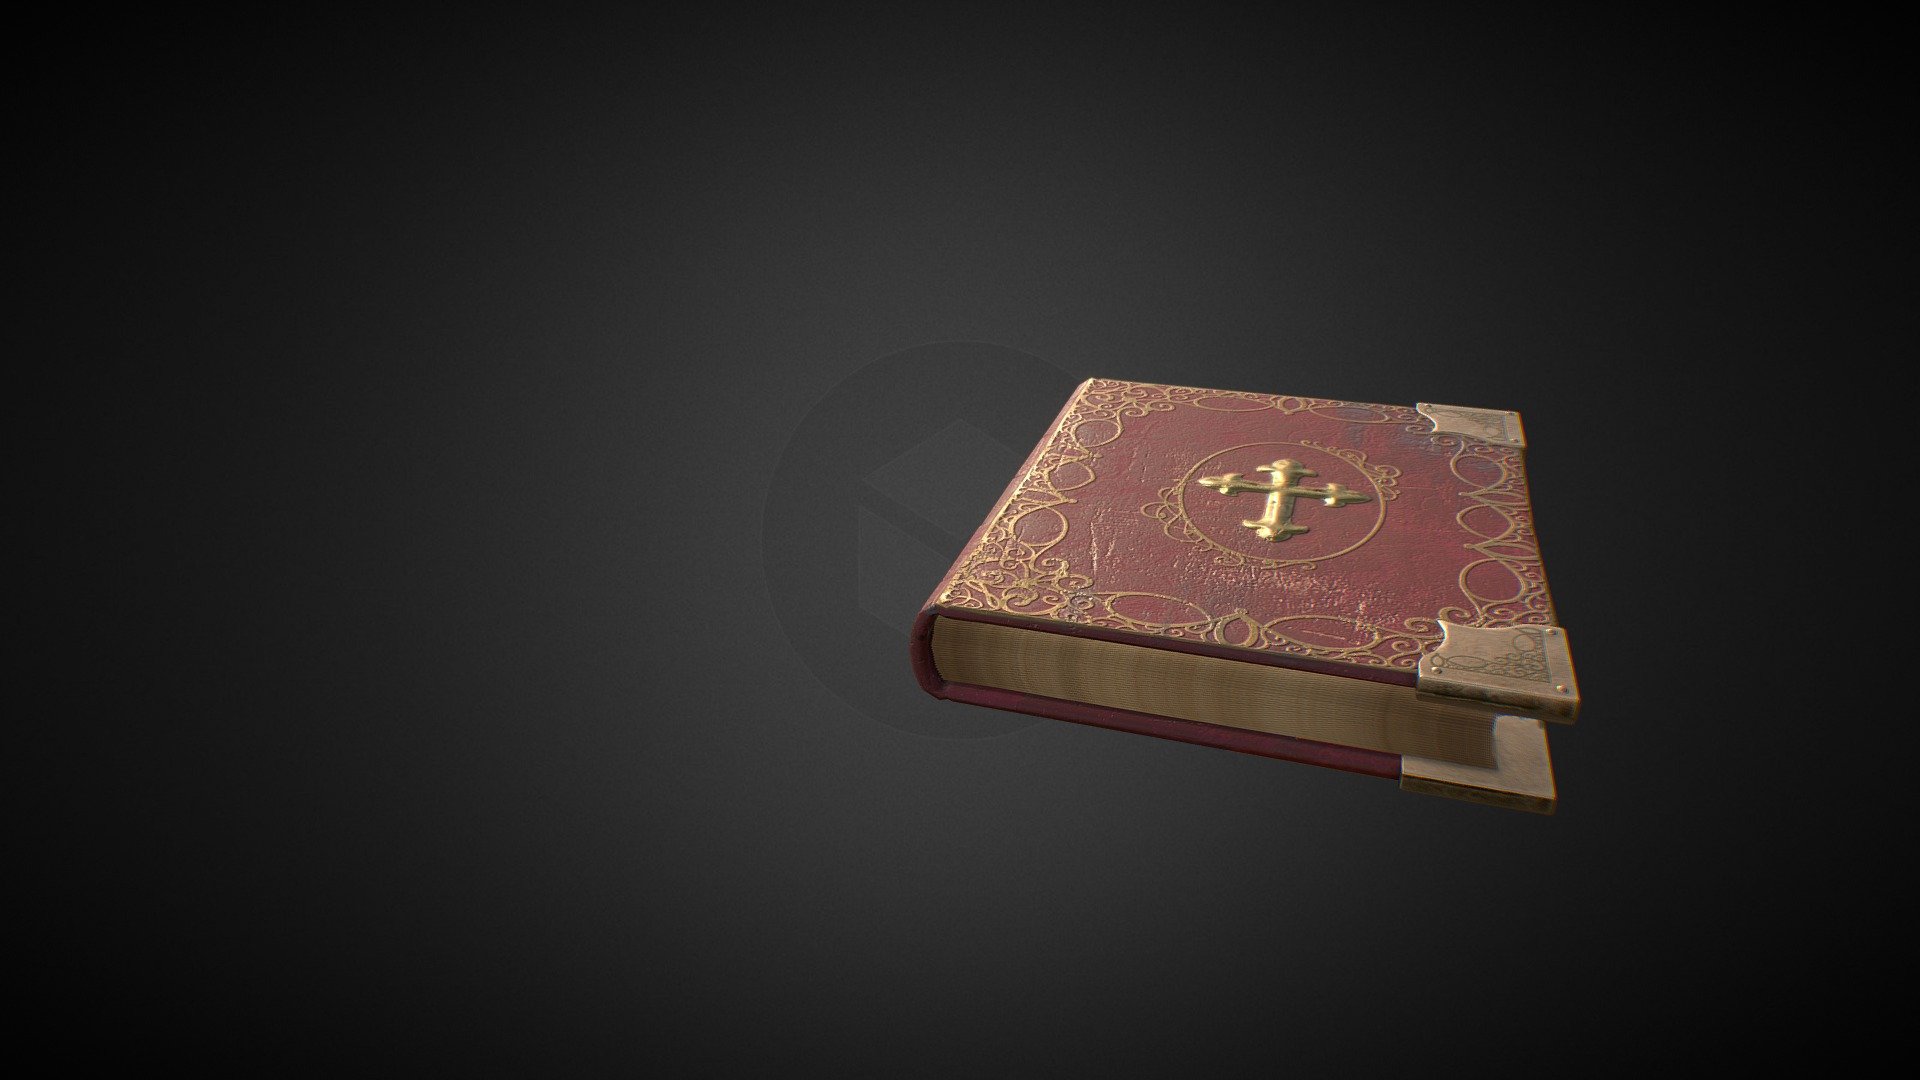 A medieval-inspired book animated using joints and nCloth simulation 3d model